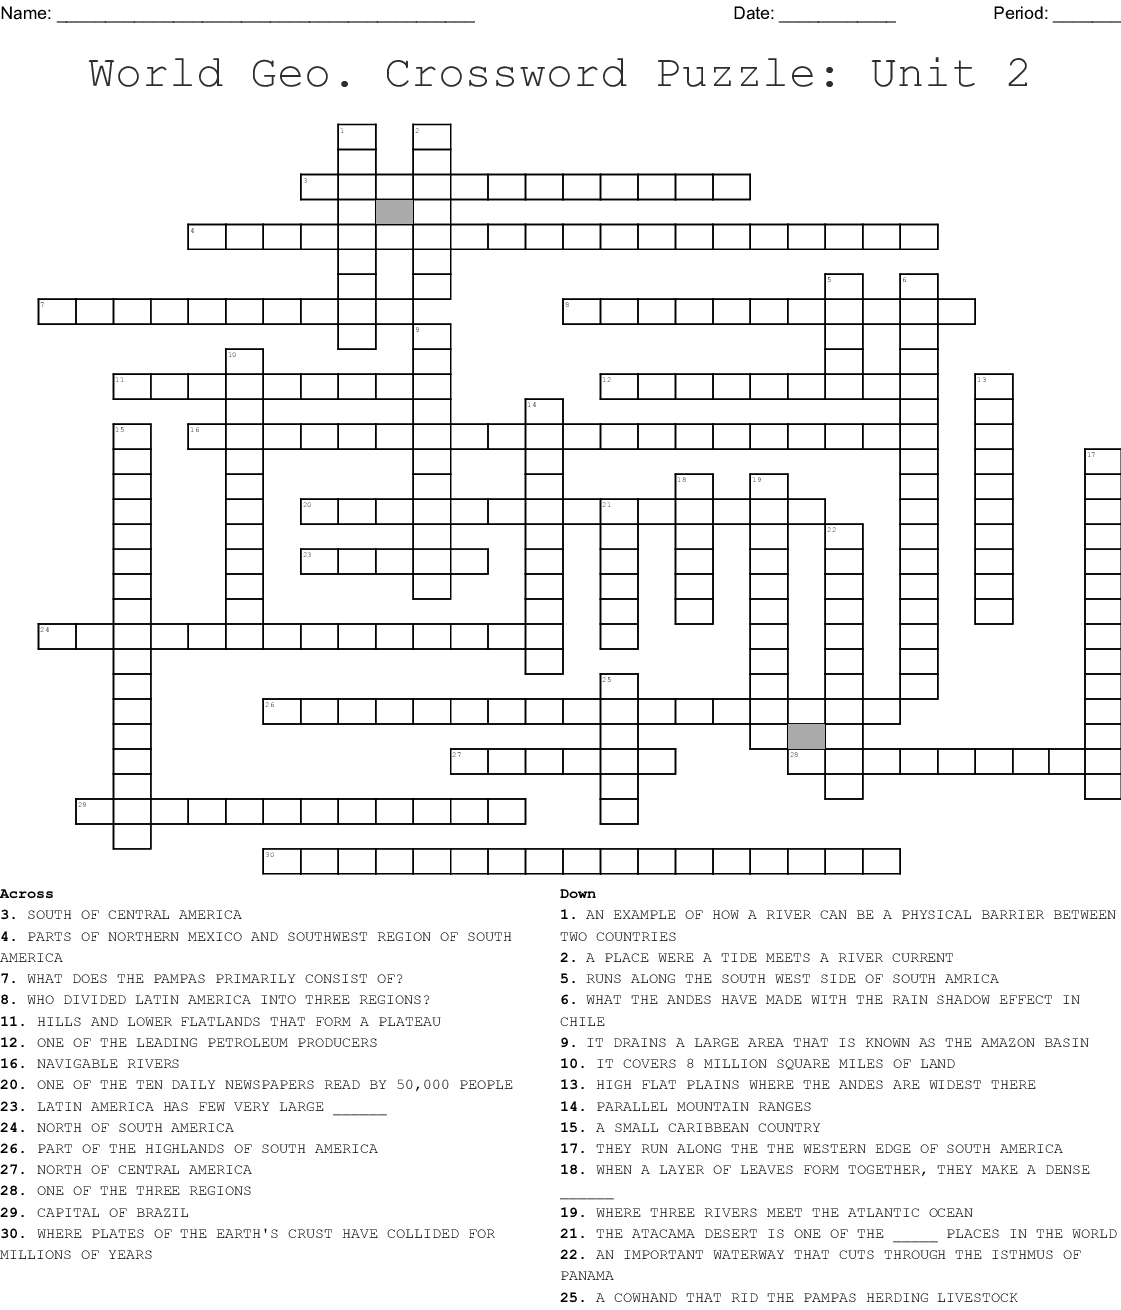 World Geography Crossword Puzzle Printable